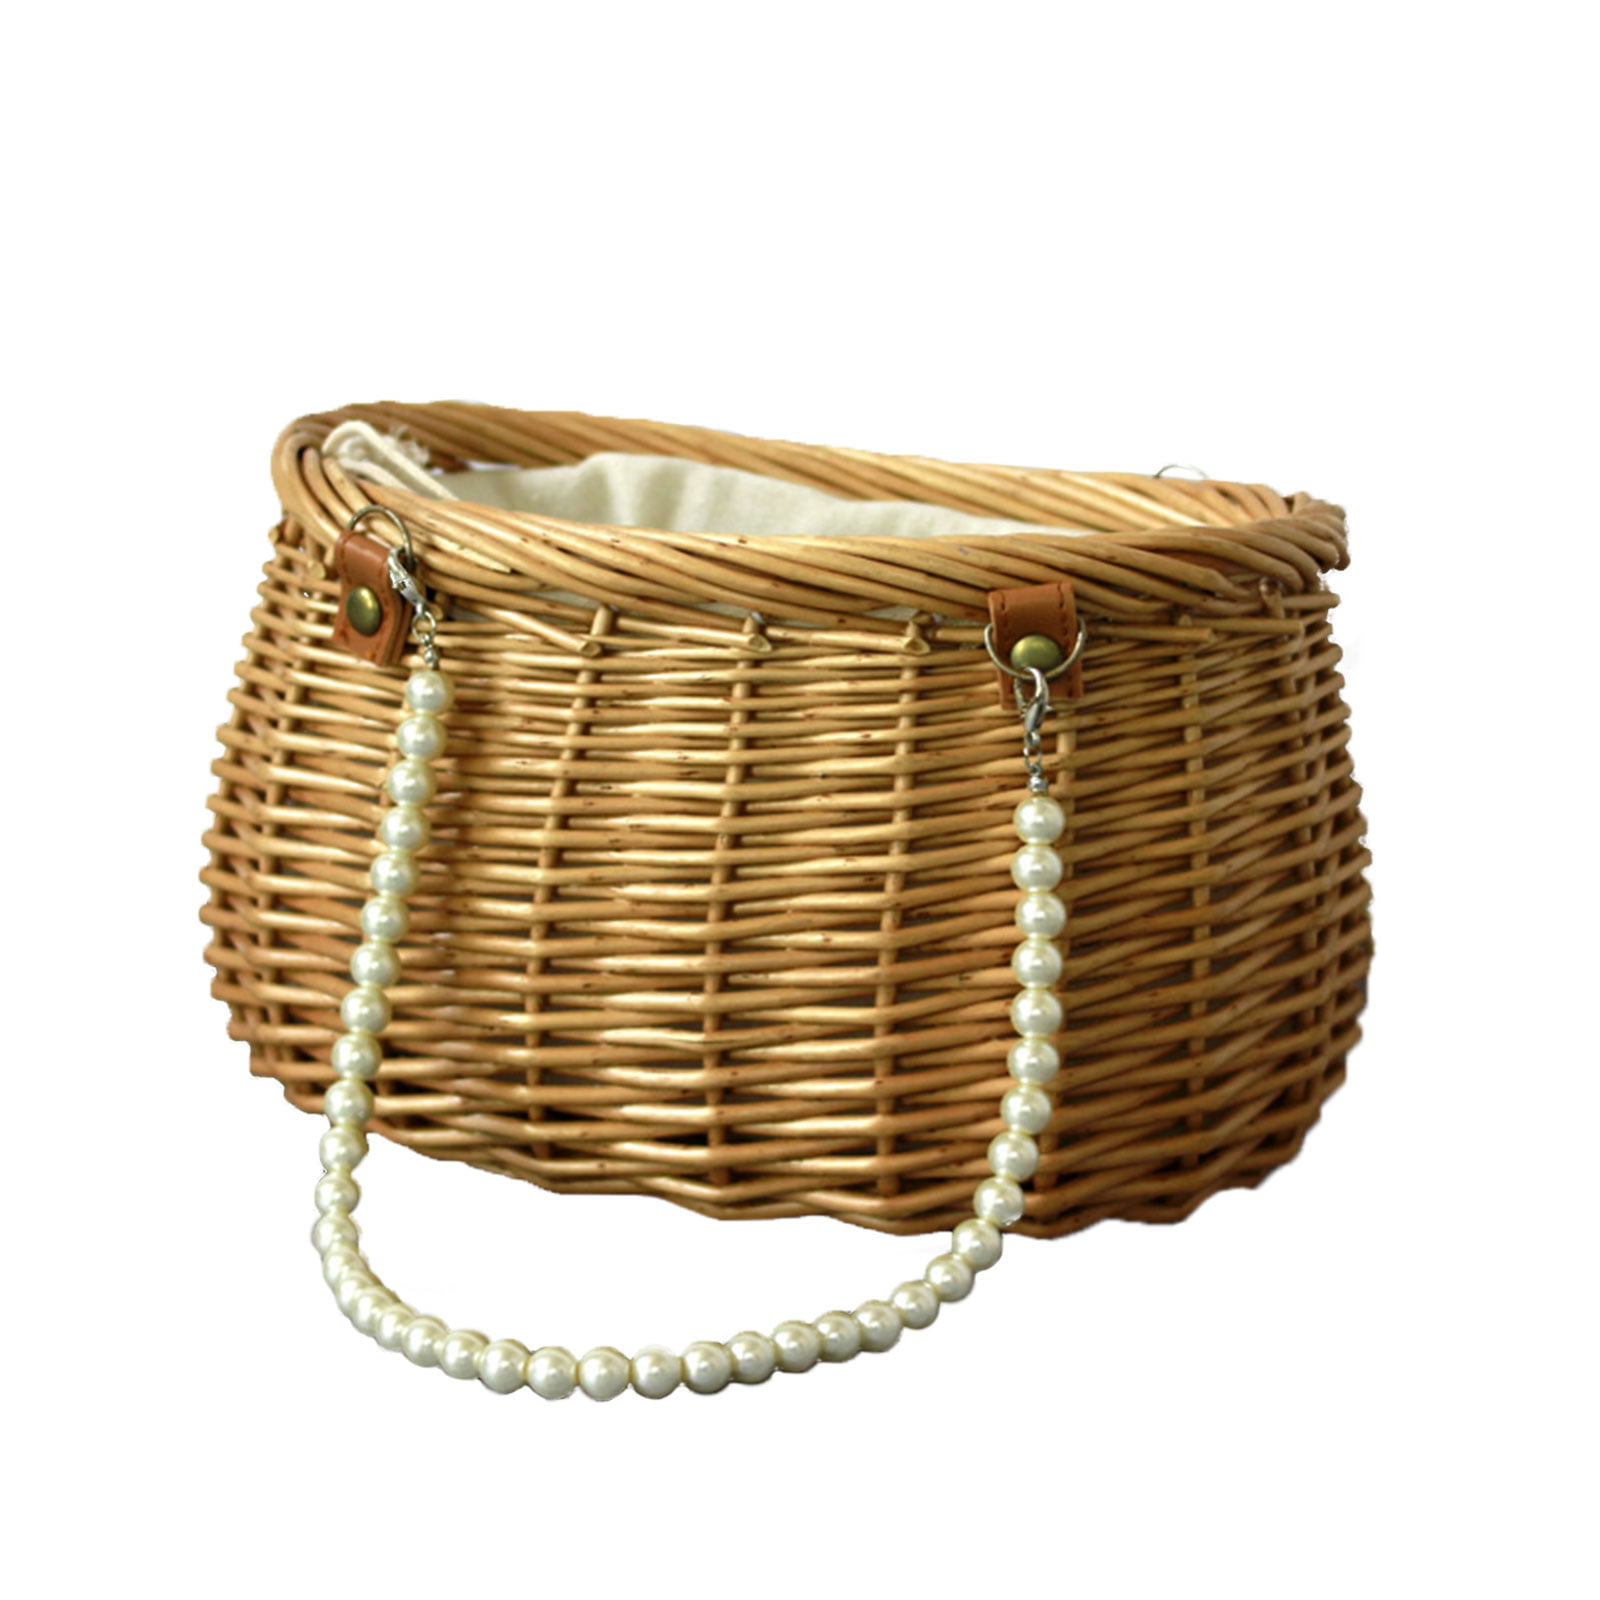 G GOOD GAIN Wicker Picnic Basket with Double Folding Handles,Willow Picnic hamper,Natural Hand Woven Easter Basket,Easter Eggs and Candy Basket,Bath Toy and Kids Toy Storage,Gift Packing basket.Linen 